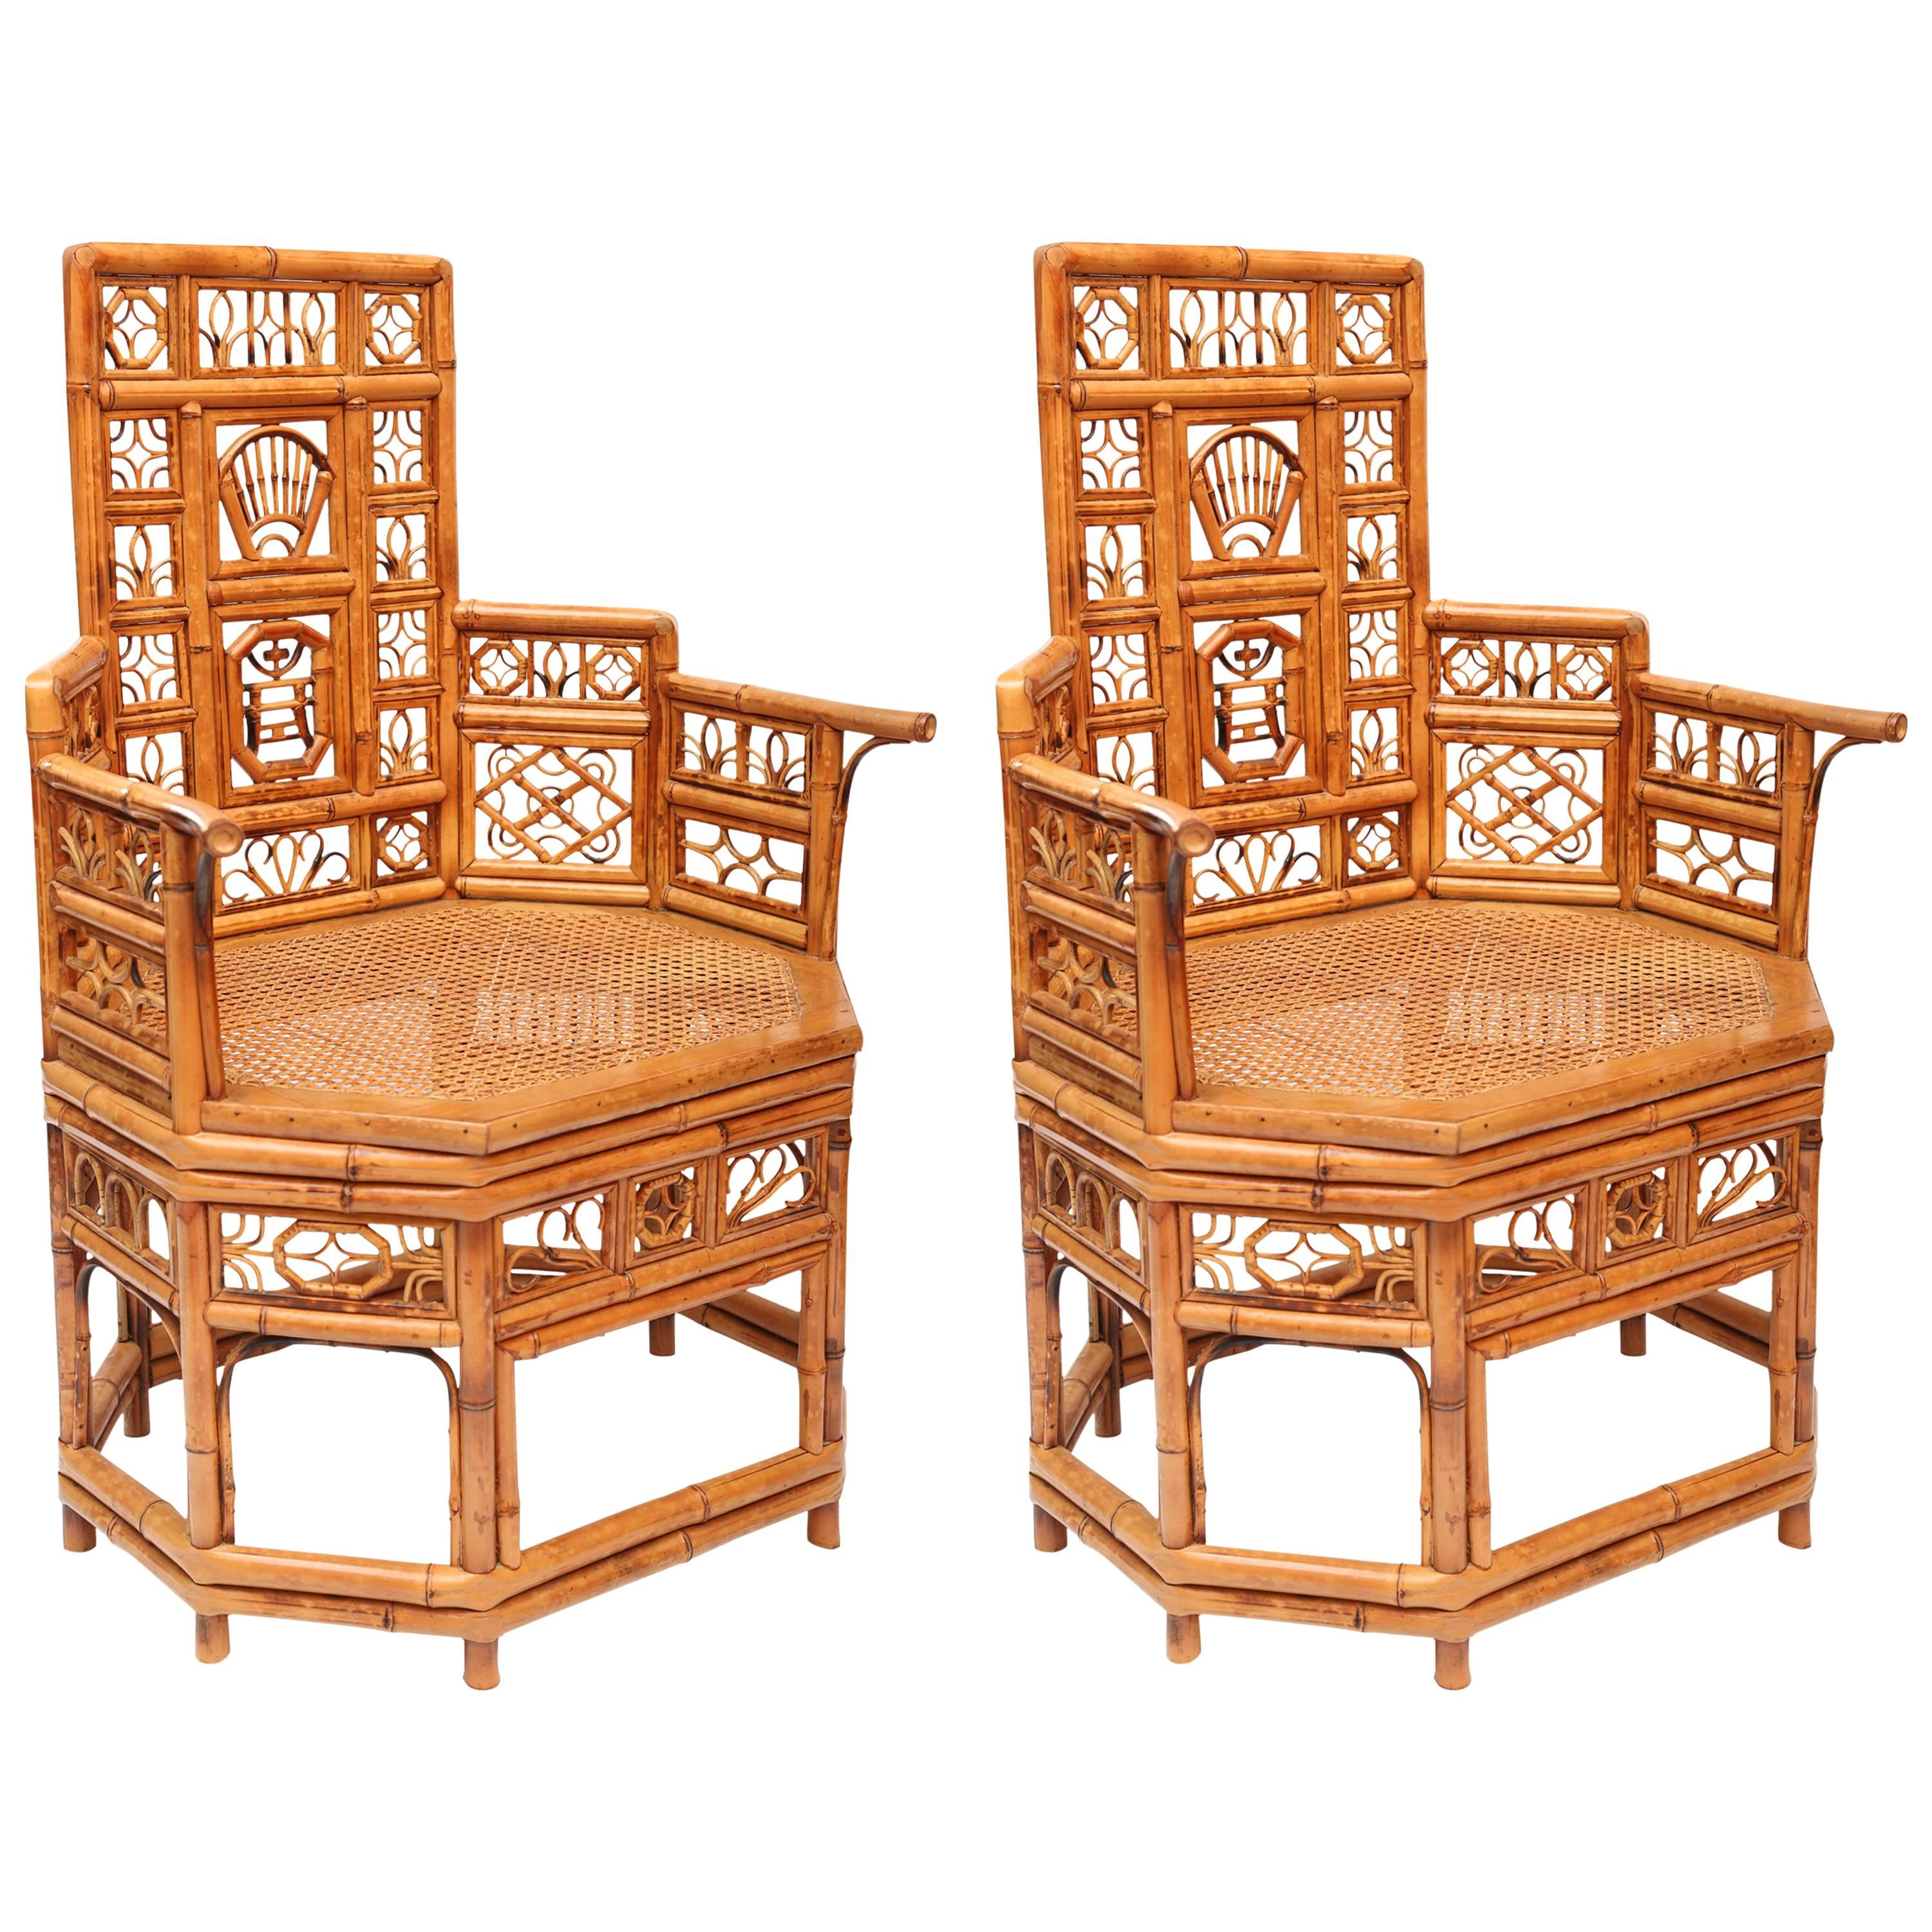 Pair of Fanciful Bamboo Armchairs